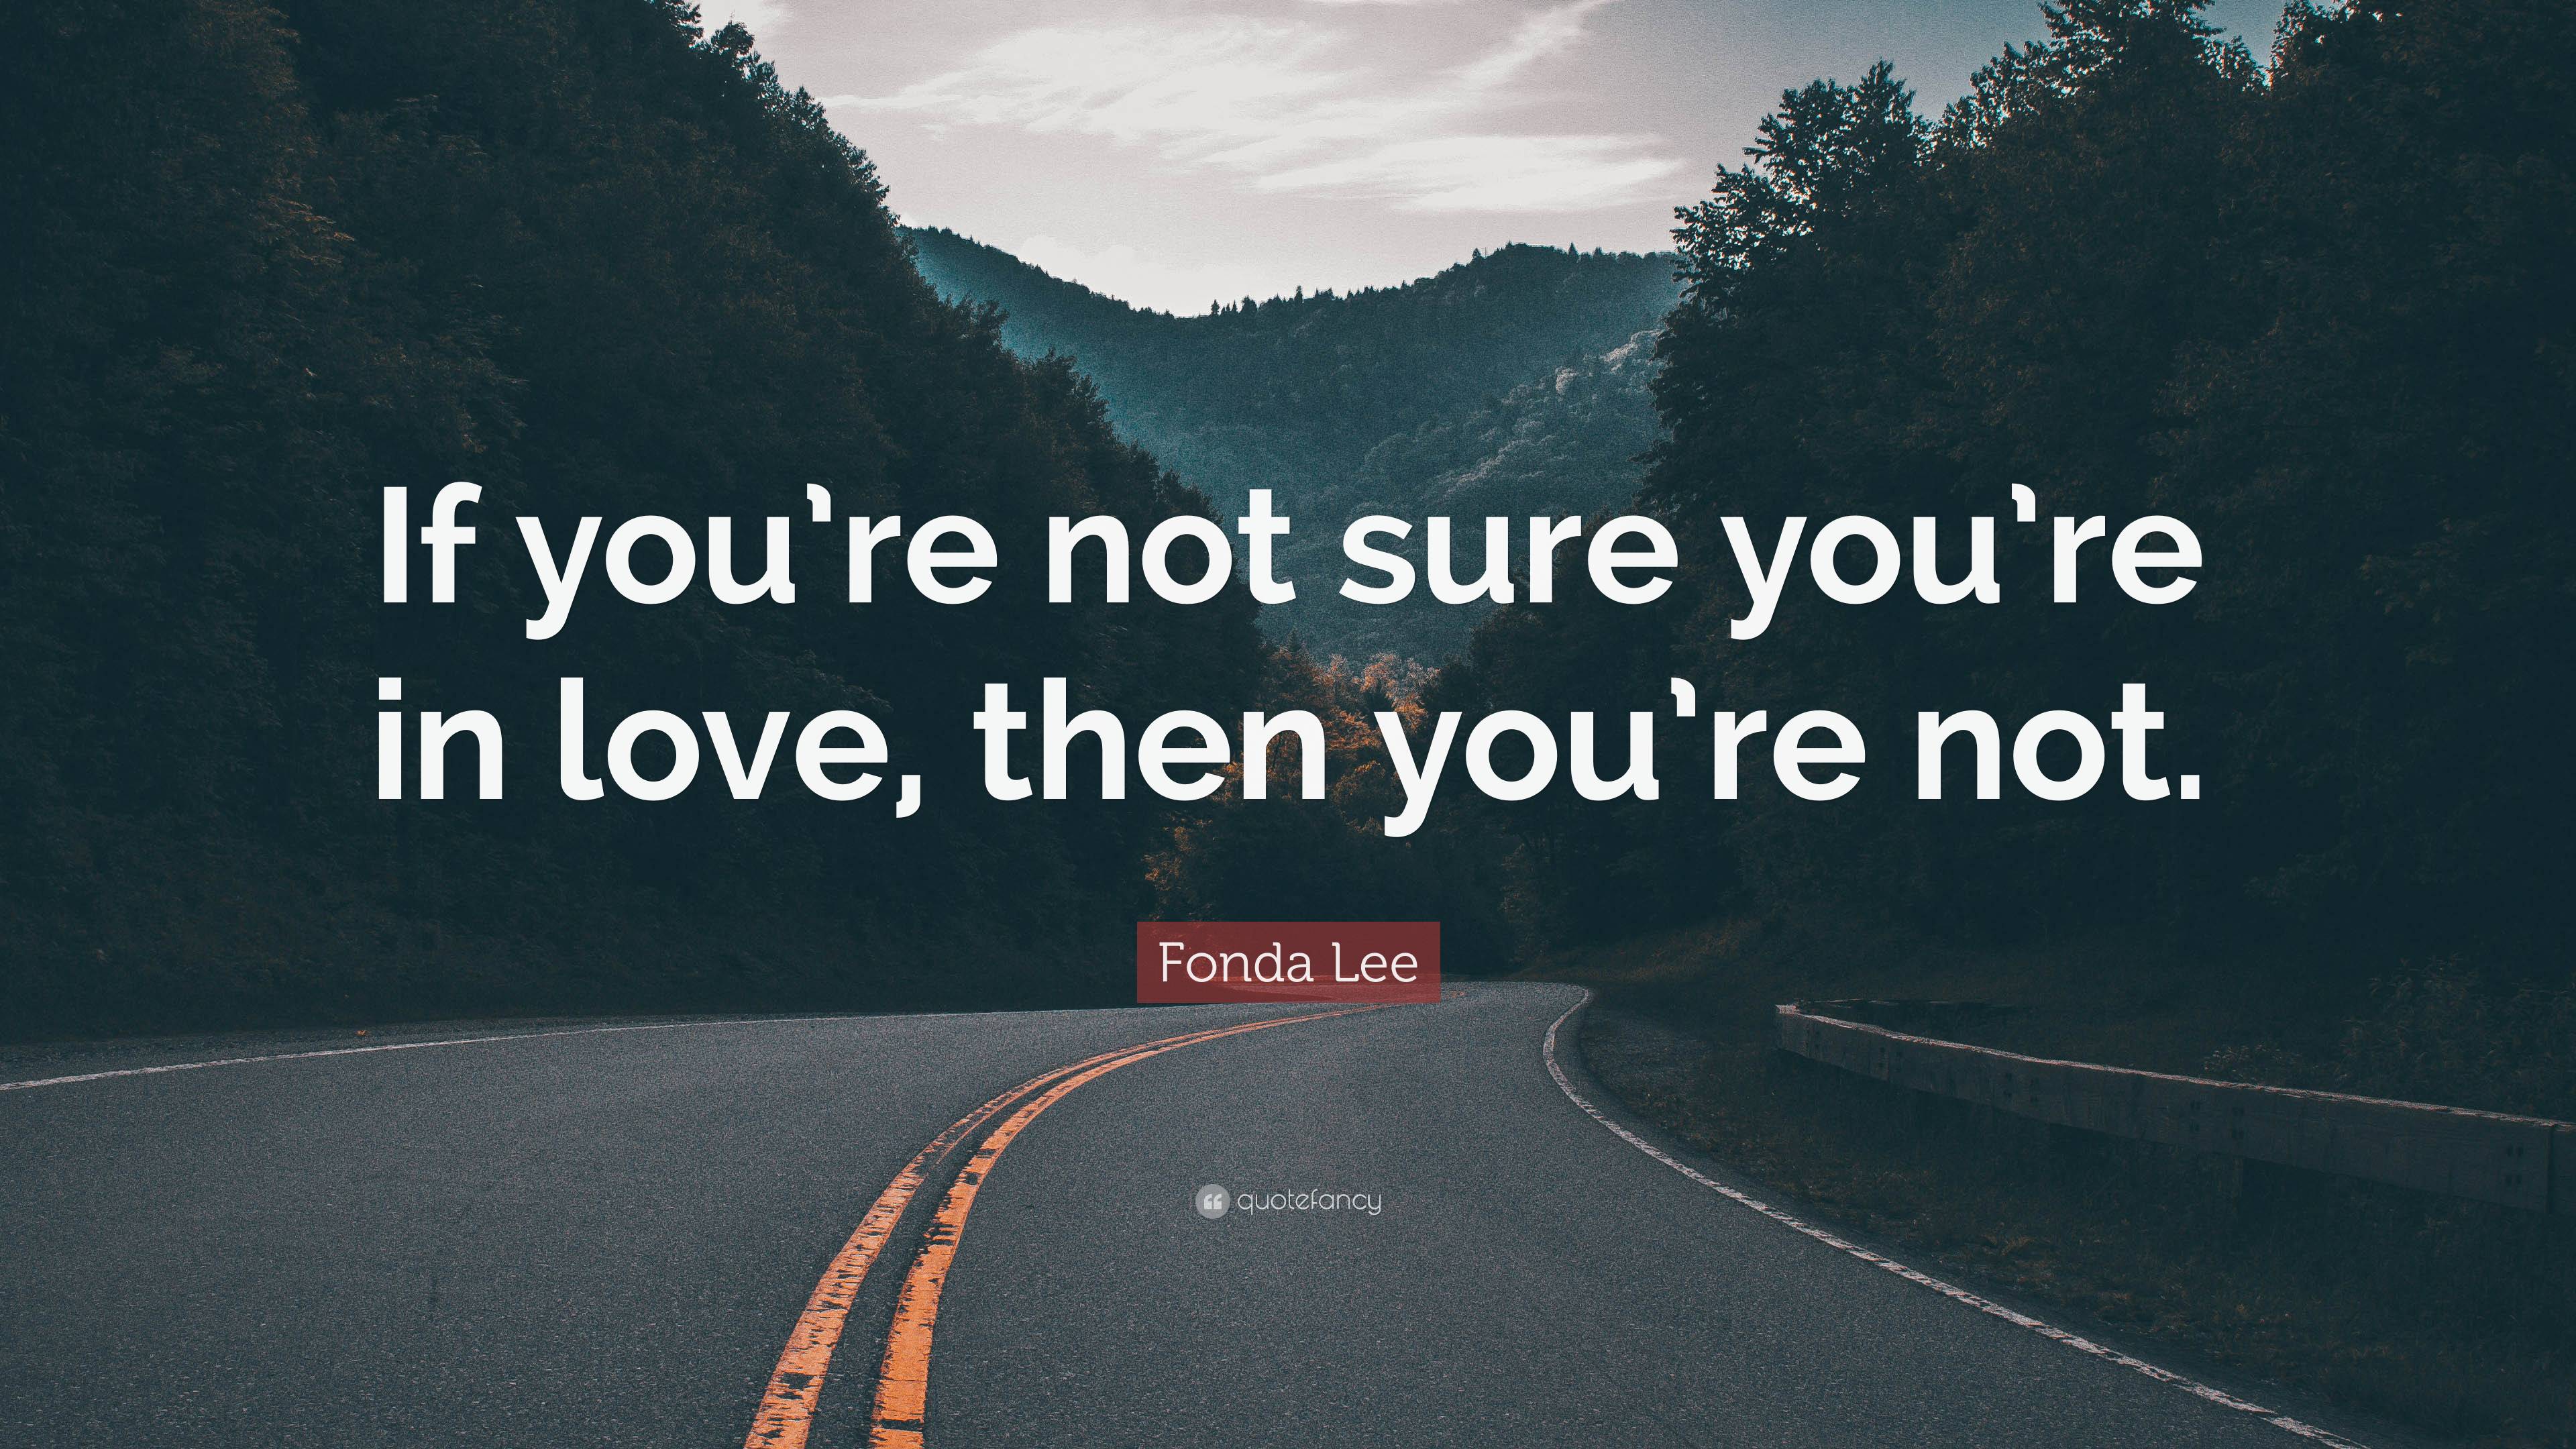 Fonda Lee Quote: “If you’re not sure you’re in love, then you’re not.”